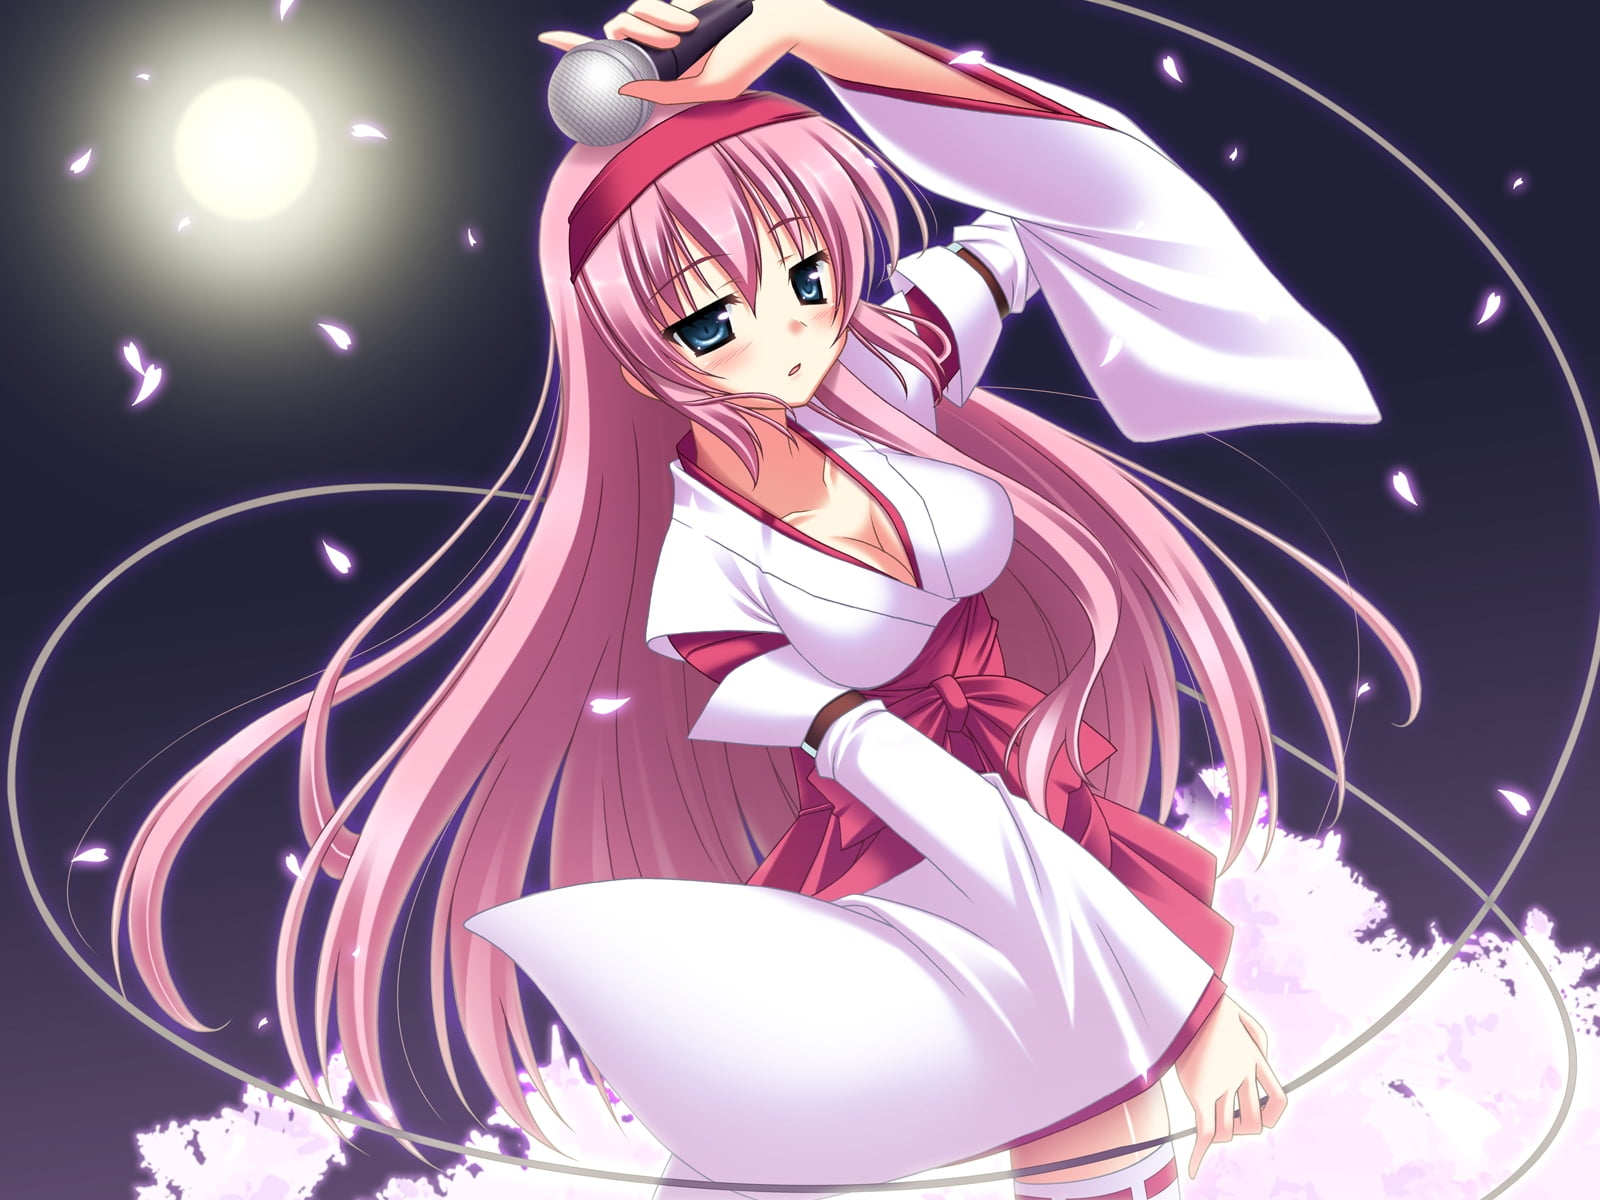 pink long-haired white dress female anime character